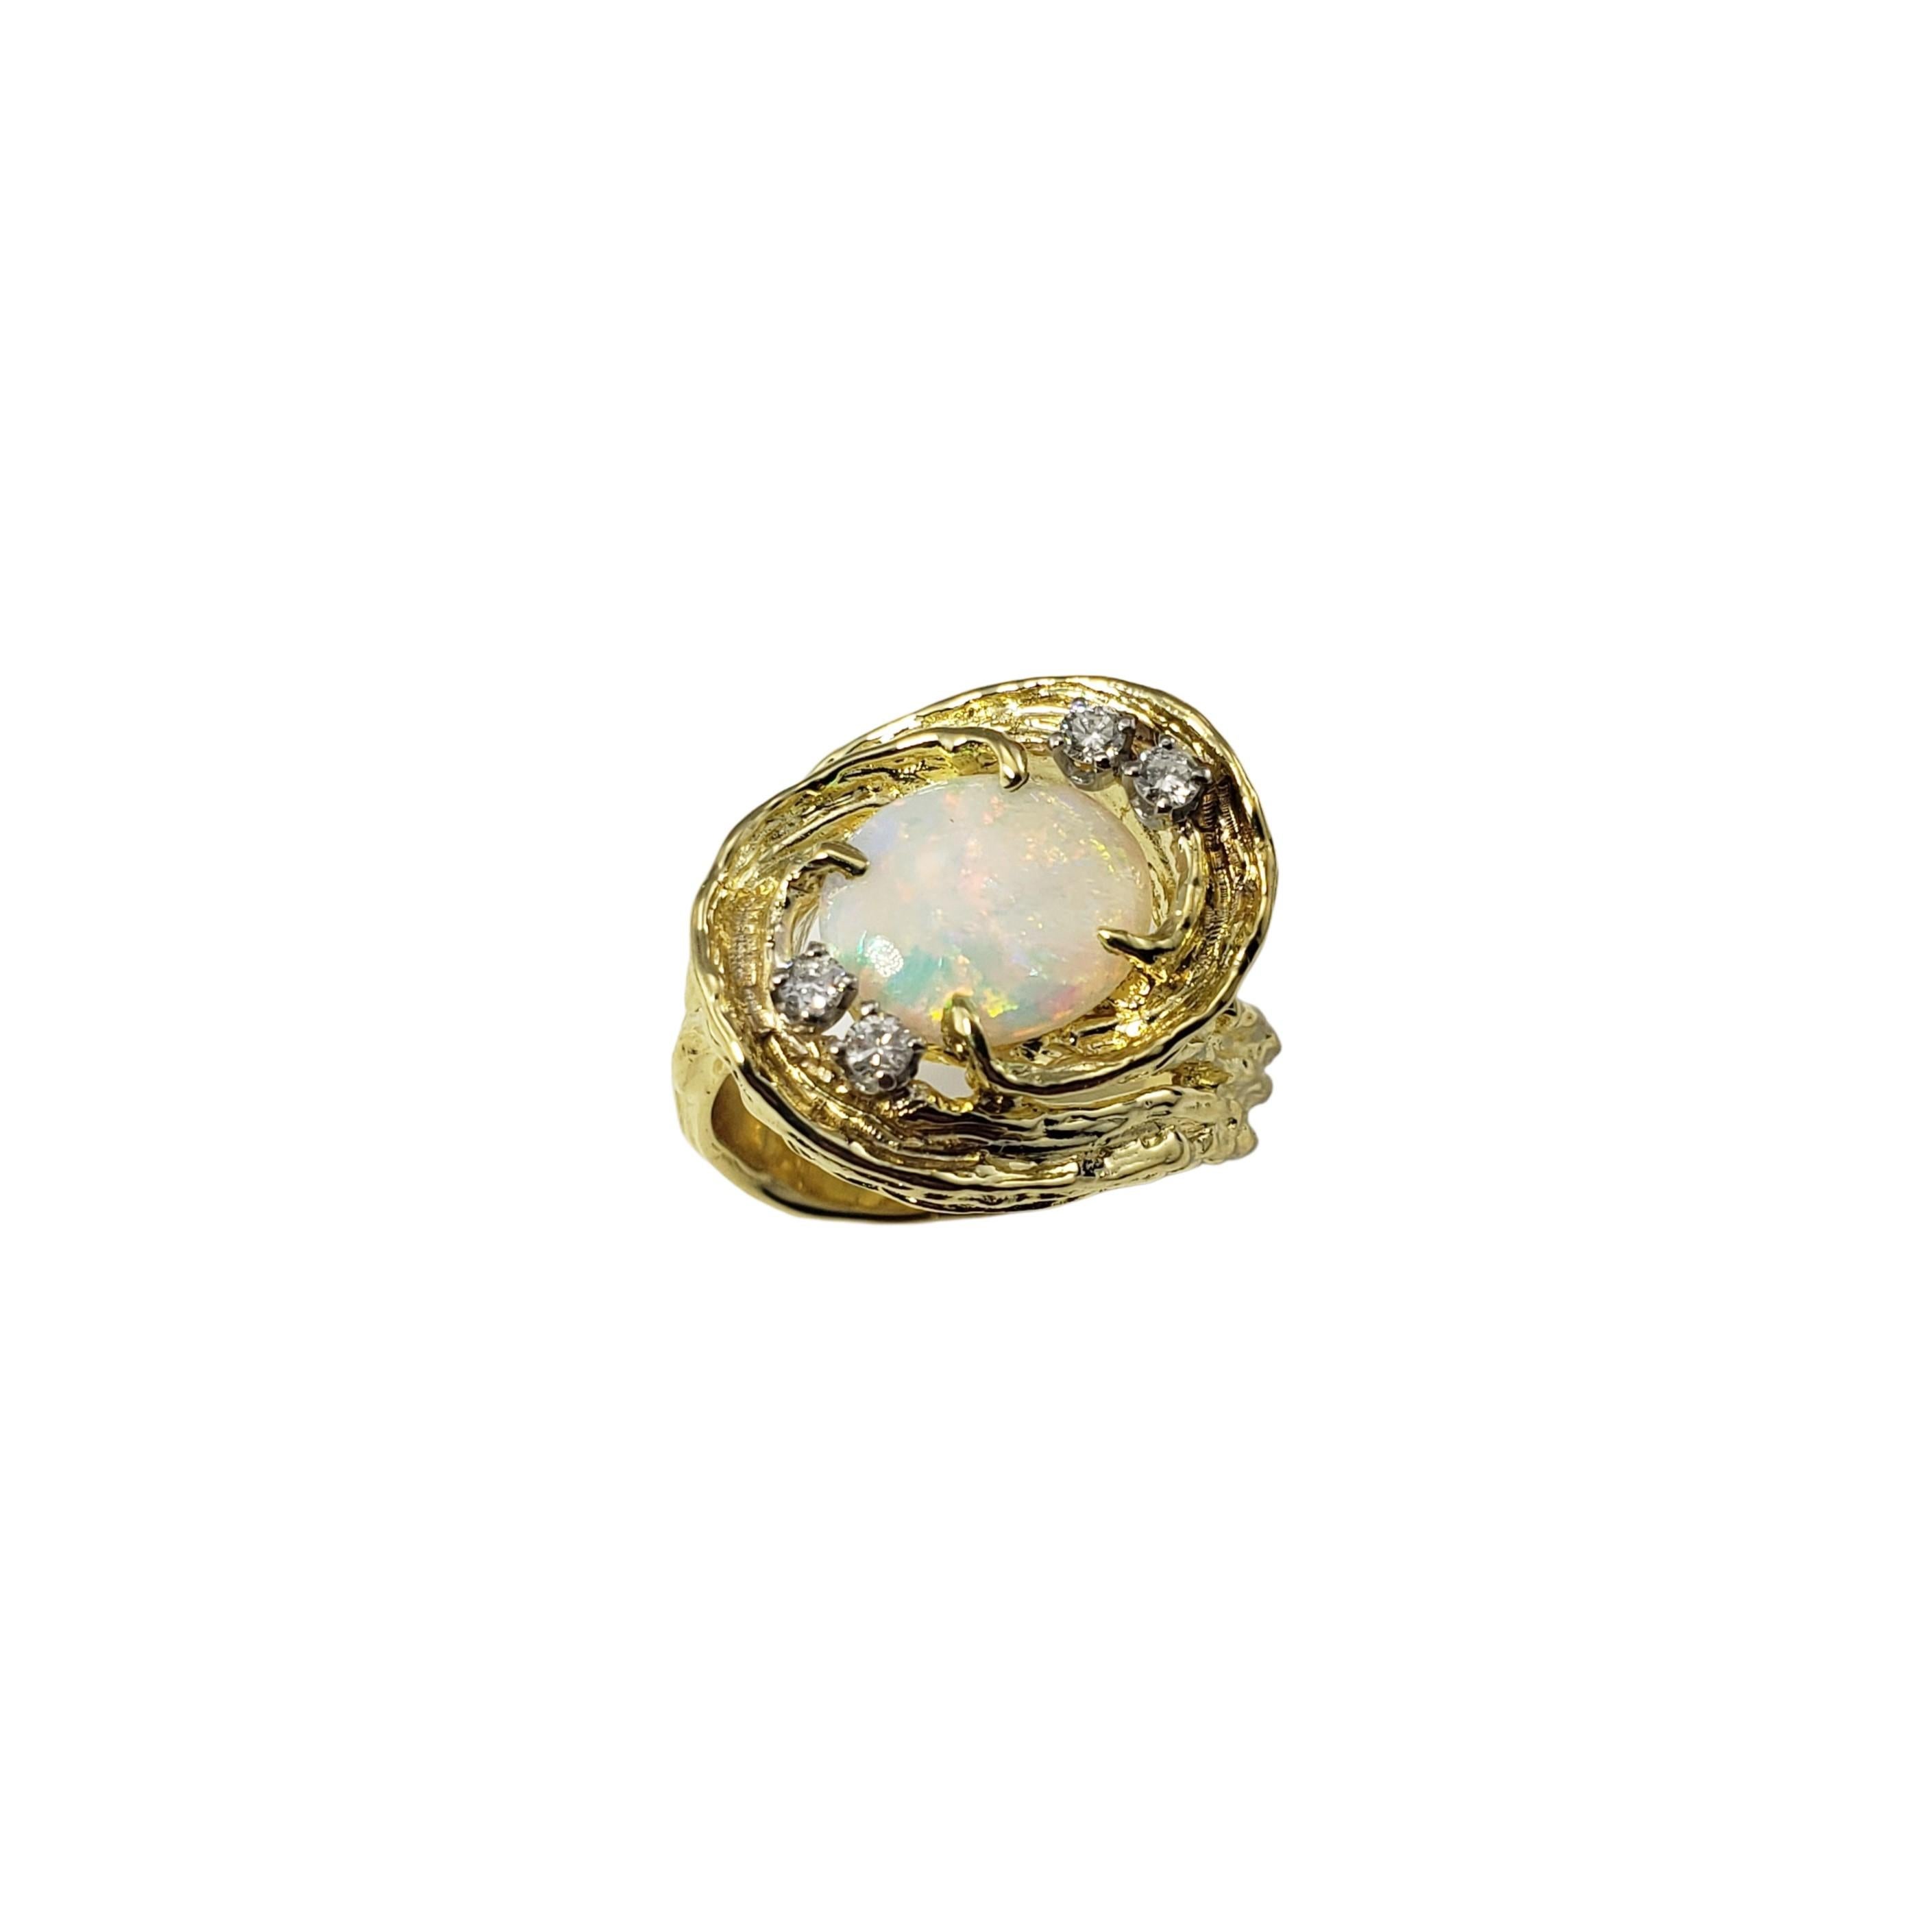 18 Karat Yellow Gold Opal and Diamond Ring Size 7-

This lovely ring features one oval opal (10 mm x 8 mm) and four round brilliant cut diamonds set in beautifully detailed 18K yellow gold.  Width:  18 mm.  Shank:  5 mm.

Approximate total diamond